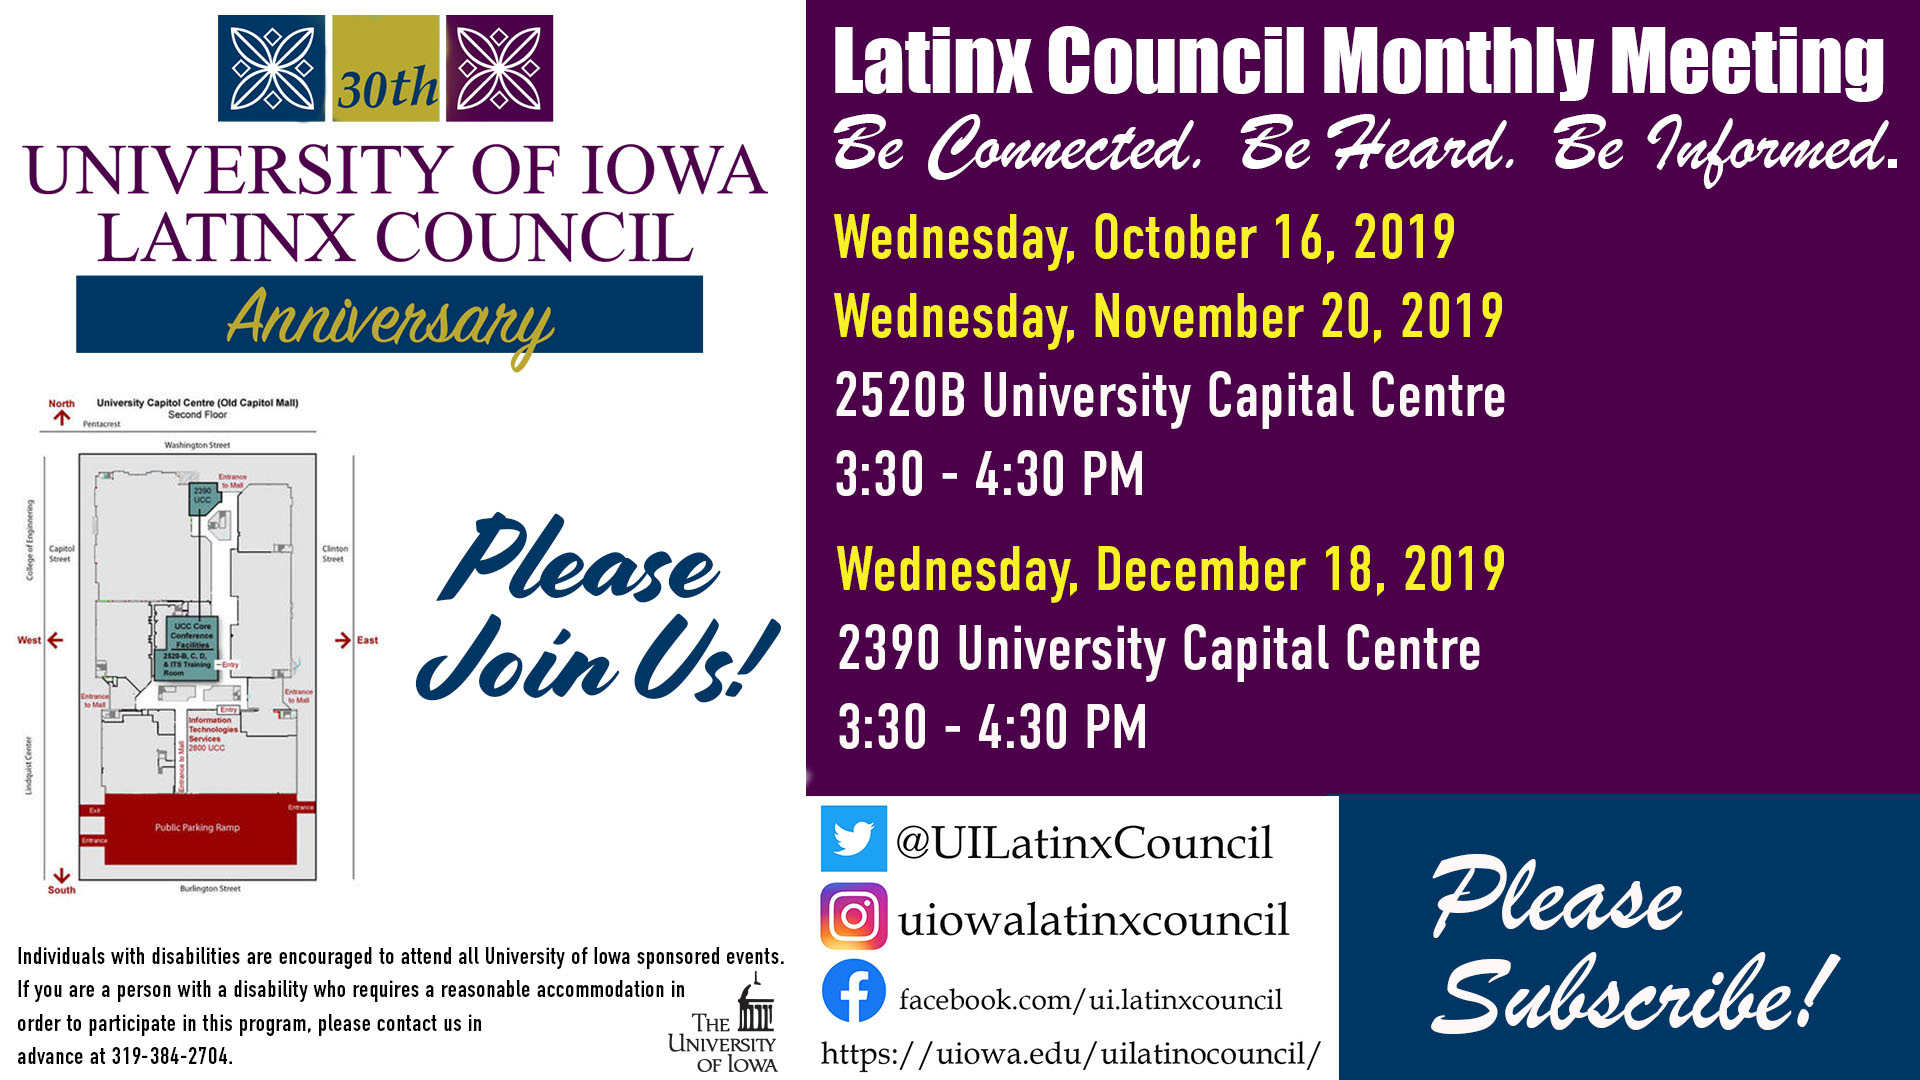 University of Iowa Latinx Council Monthly Meeting. Be connect, be heard, be informed. Please join us! 